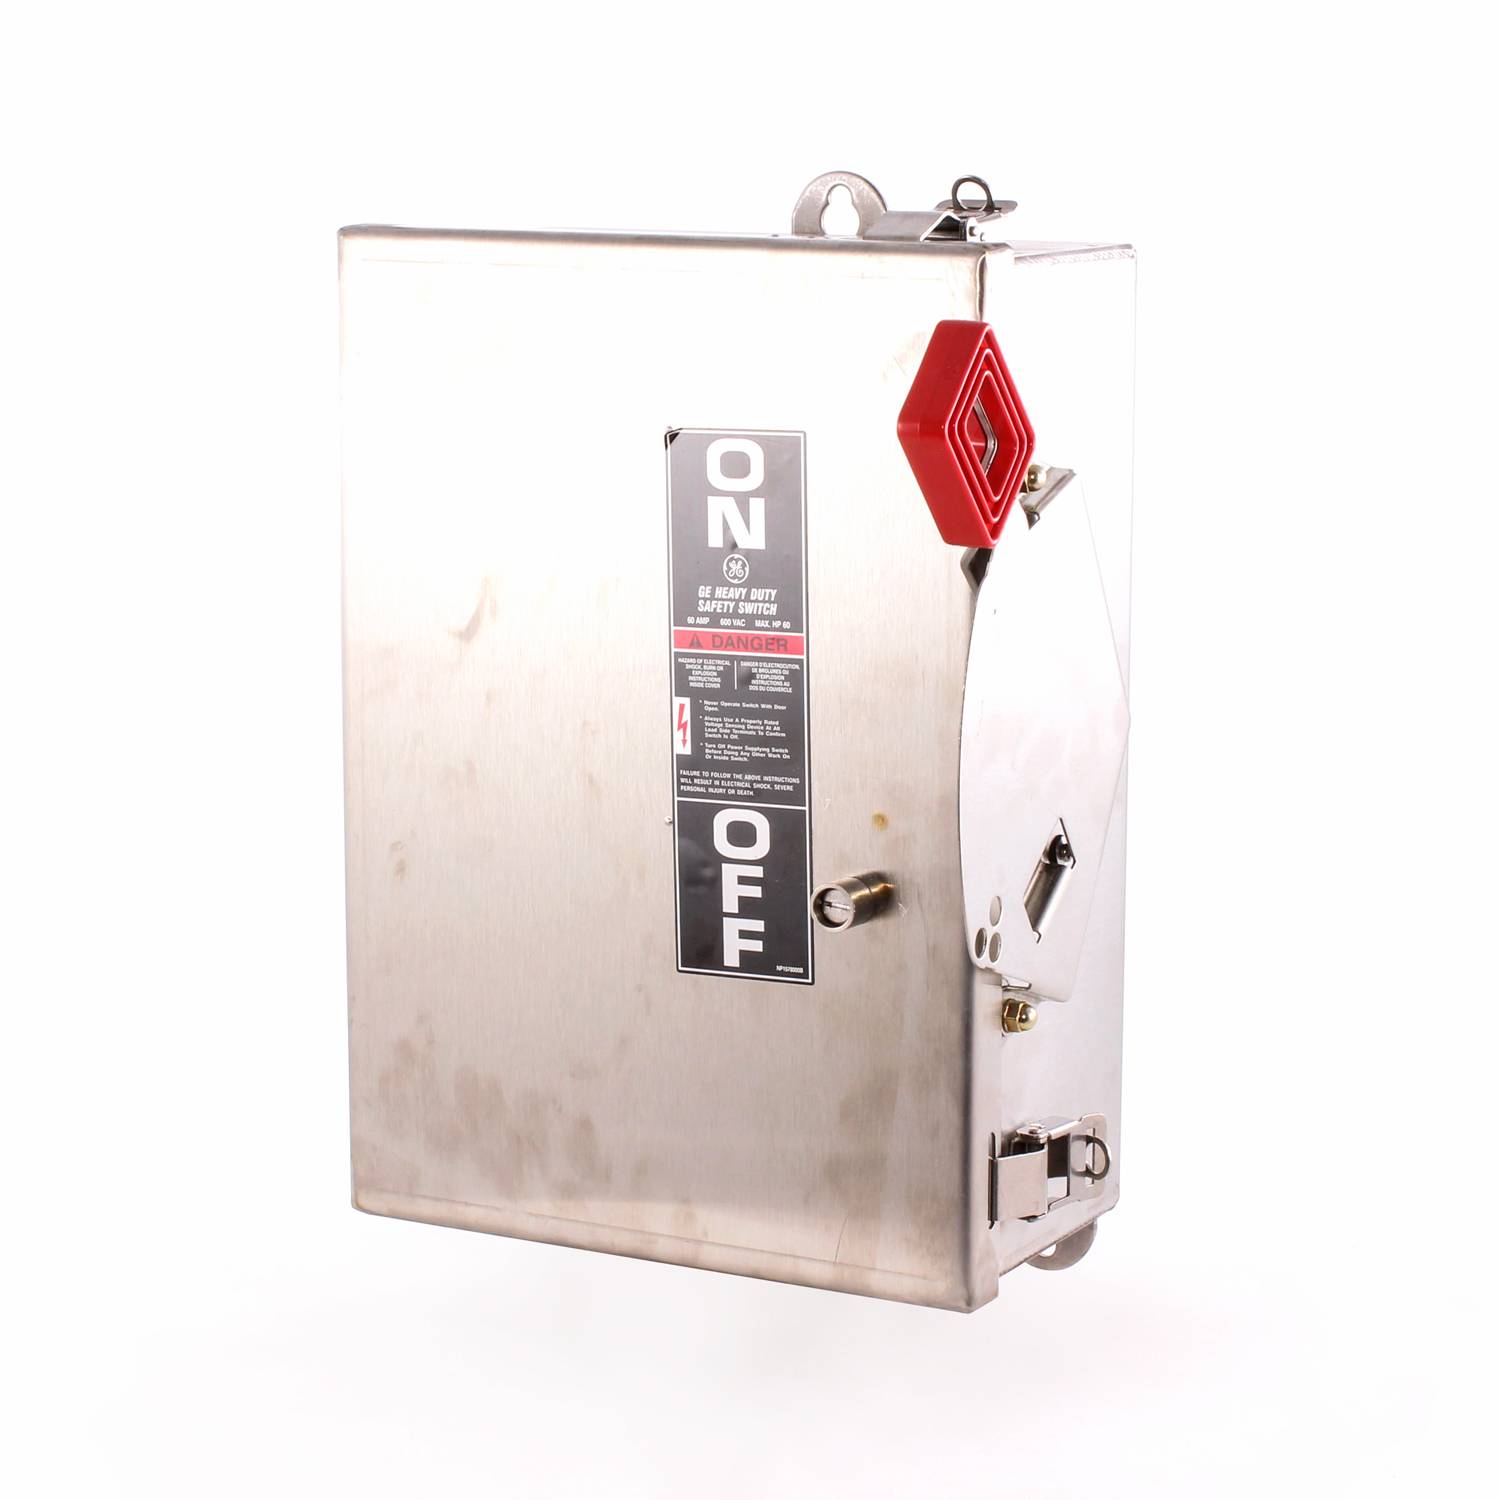 GE Spec-Setter® THN3362SS Heavy Duty Non-Fused Safety Switch, 600 VAC, 60 A, 60 hp, 3 Poles